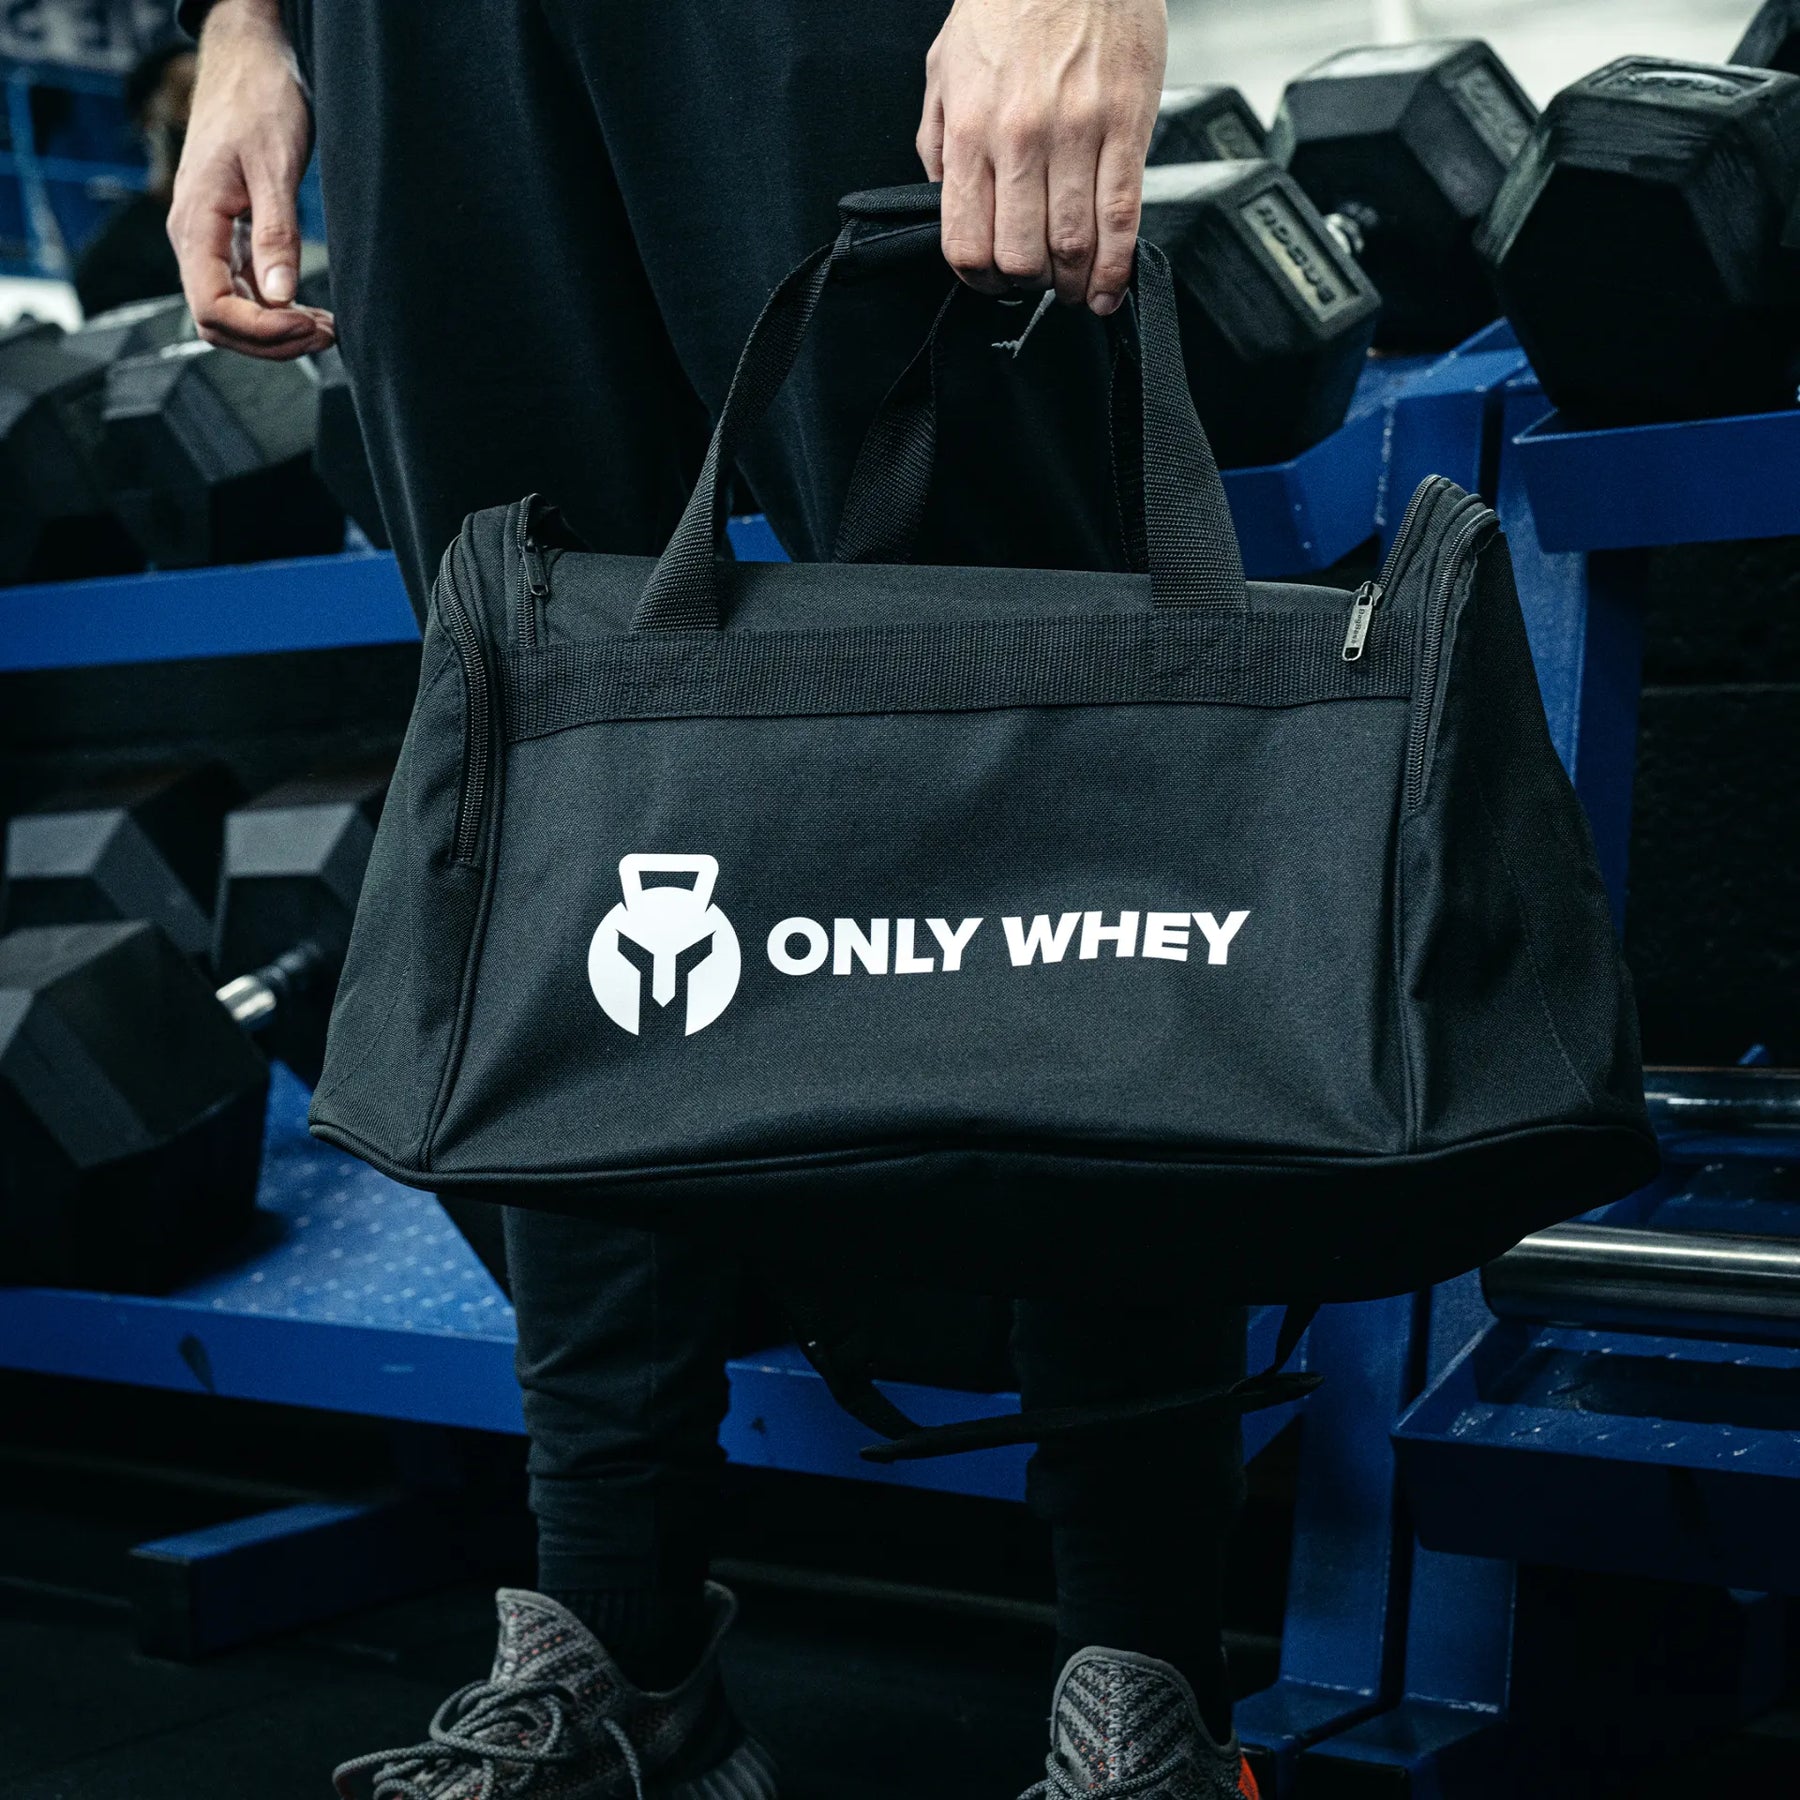 Only Whey bag